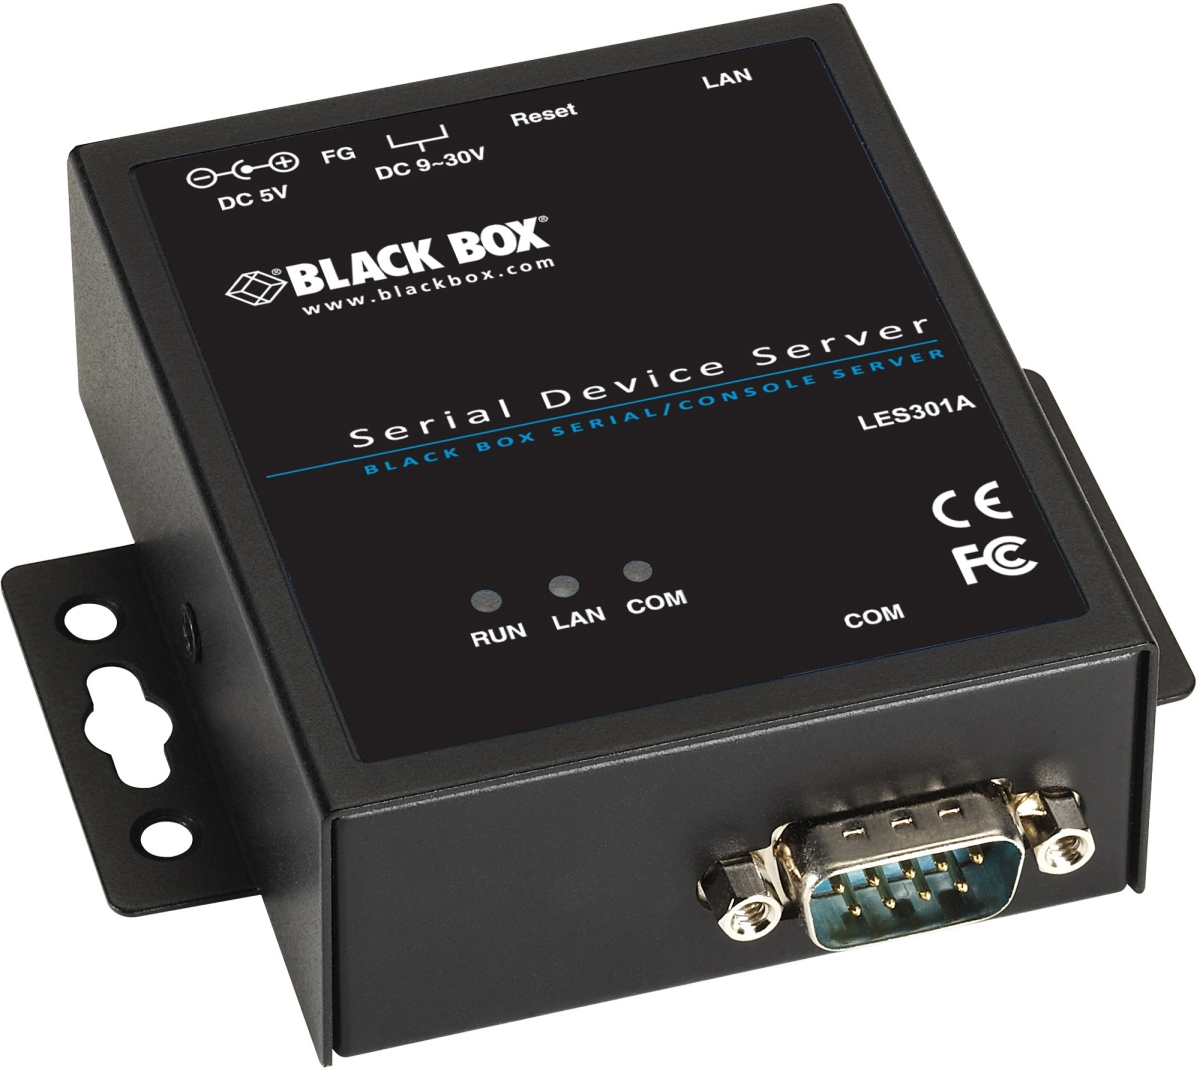 Picture of Black Box BBX-LES301A Series Industrial Serial Device Server - RS-232-422-485 DB9 Male 1 10-100-Mbps RJ-45